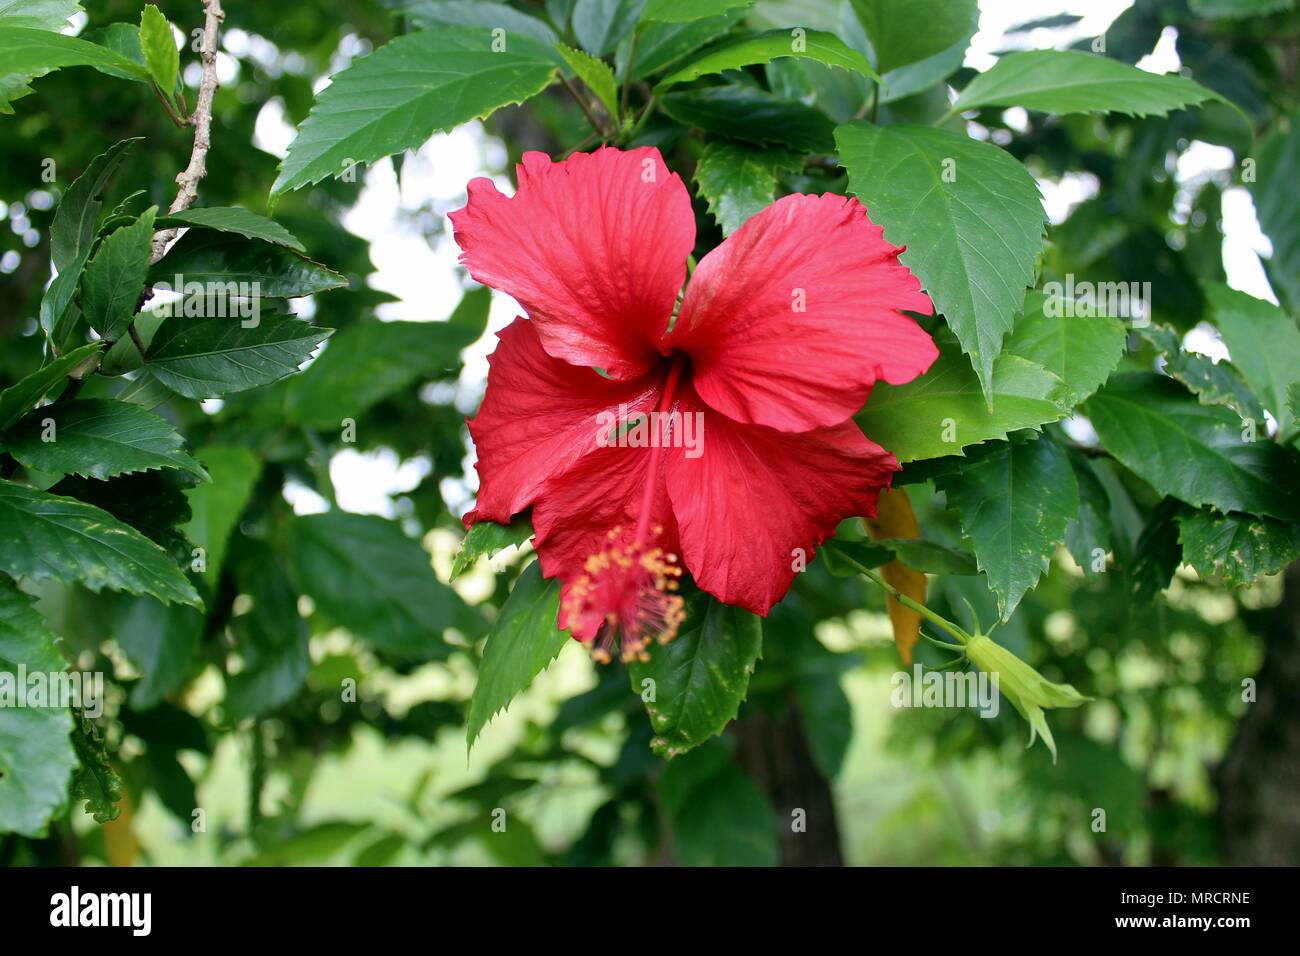 Hibiscus is a genus of flowering plants in the mallow family, Malvaceae. The genus is quite large. Stock Photo